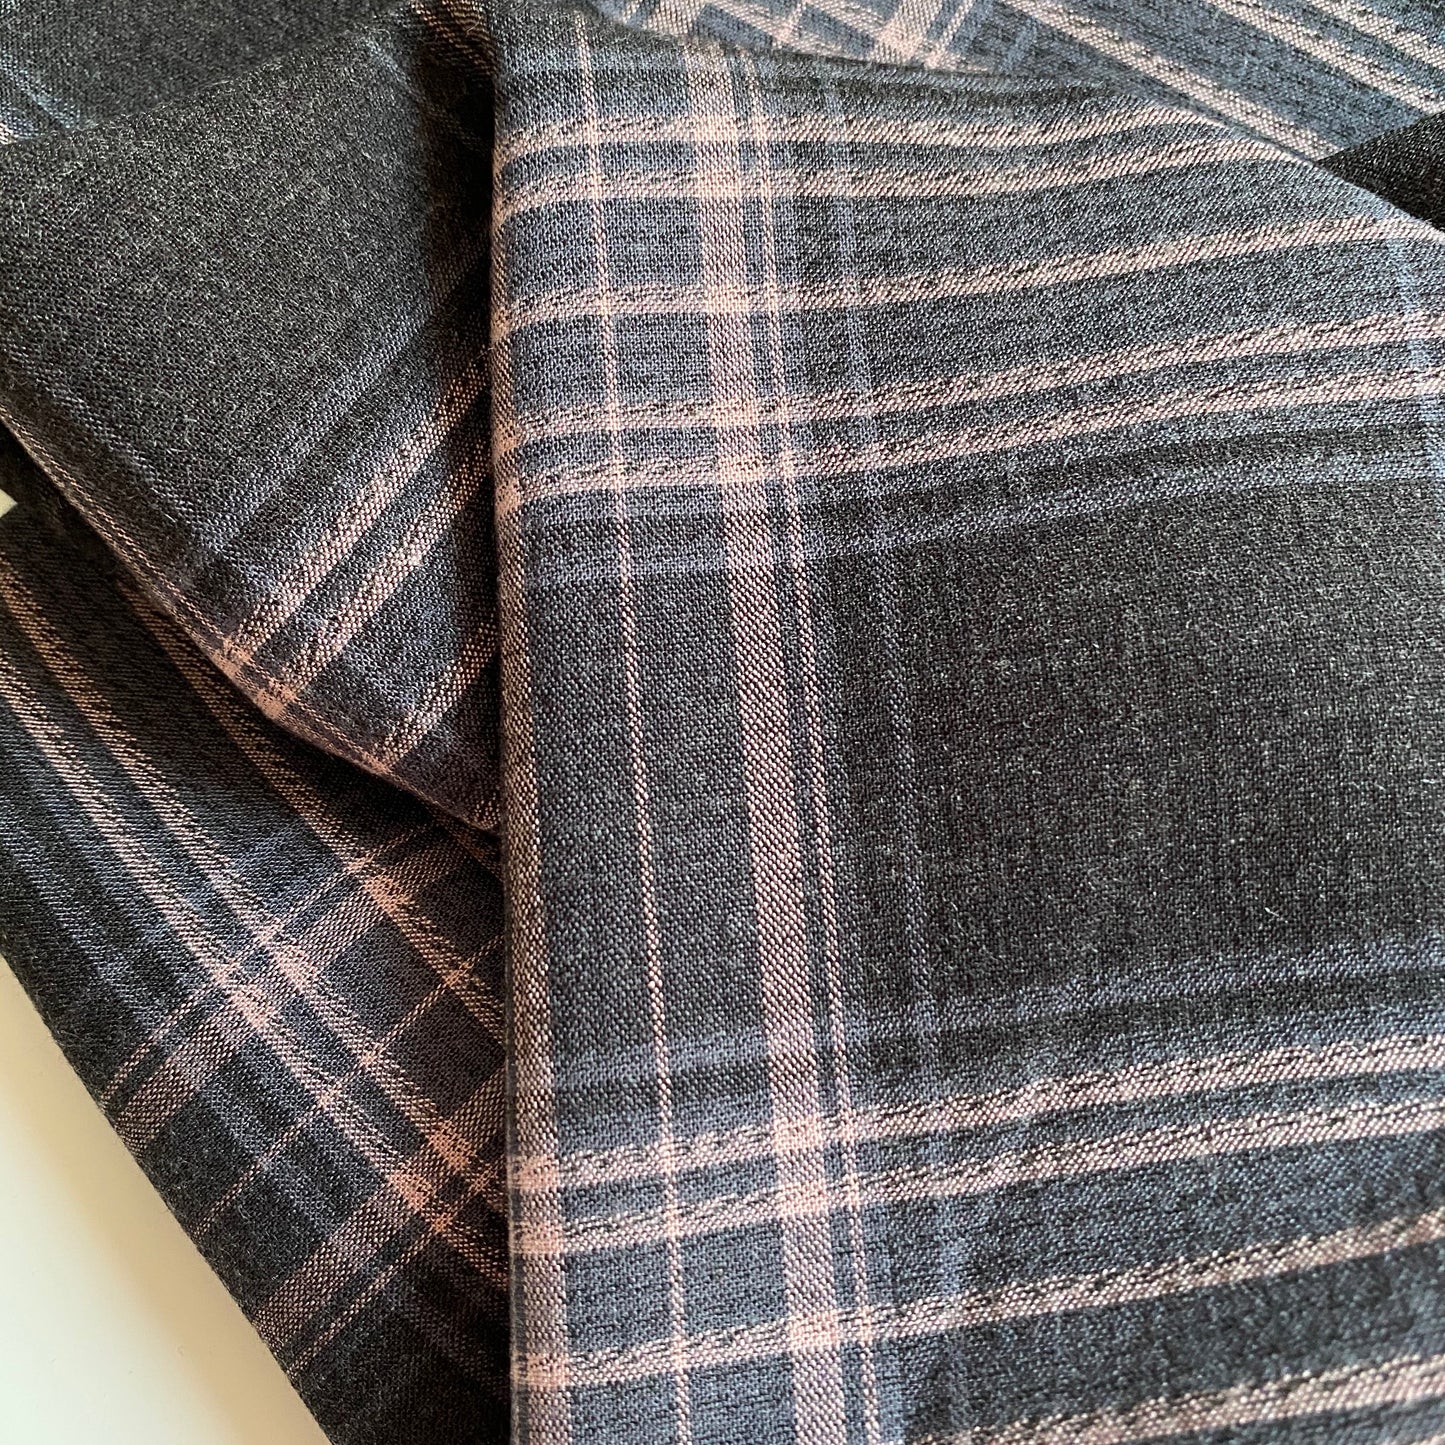 Helsinki Old Rose and Charcoal Grey Check